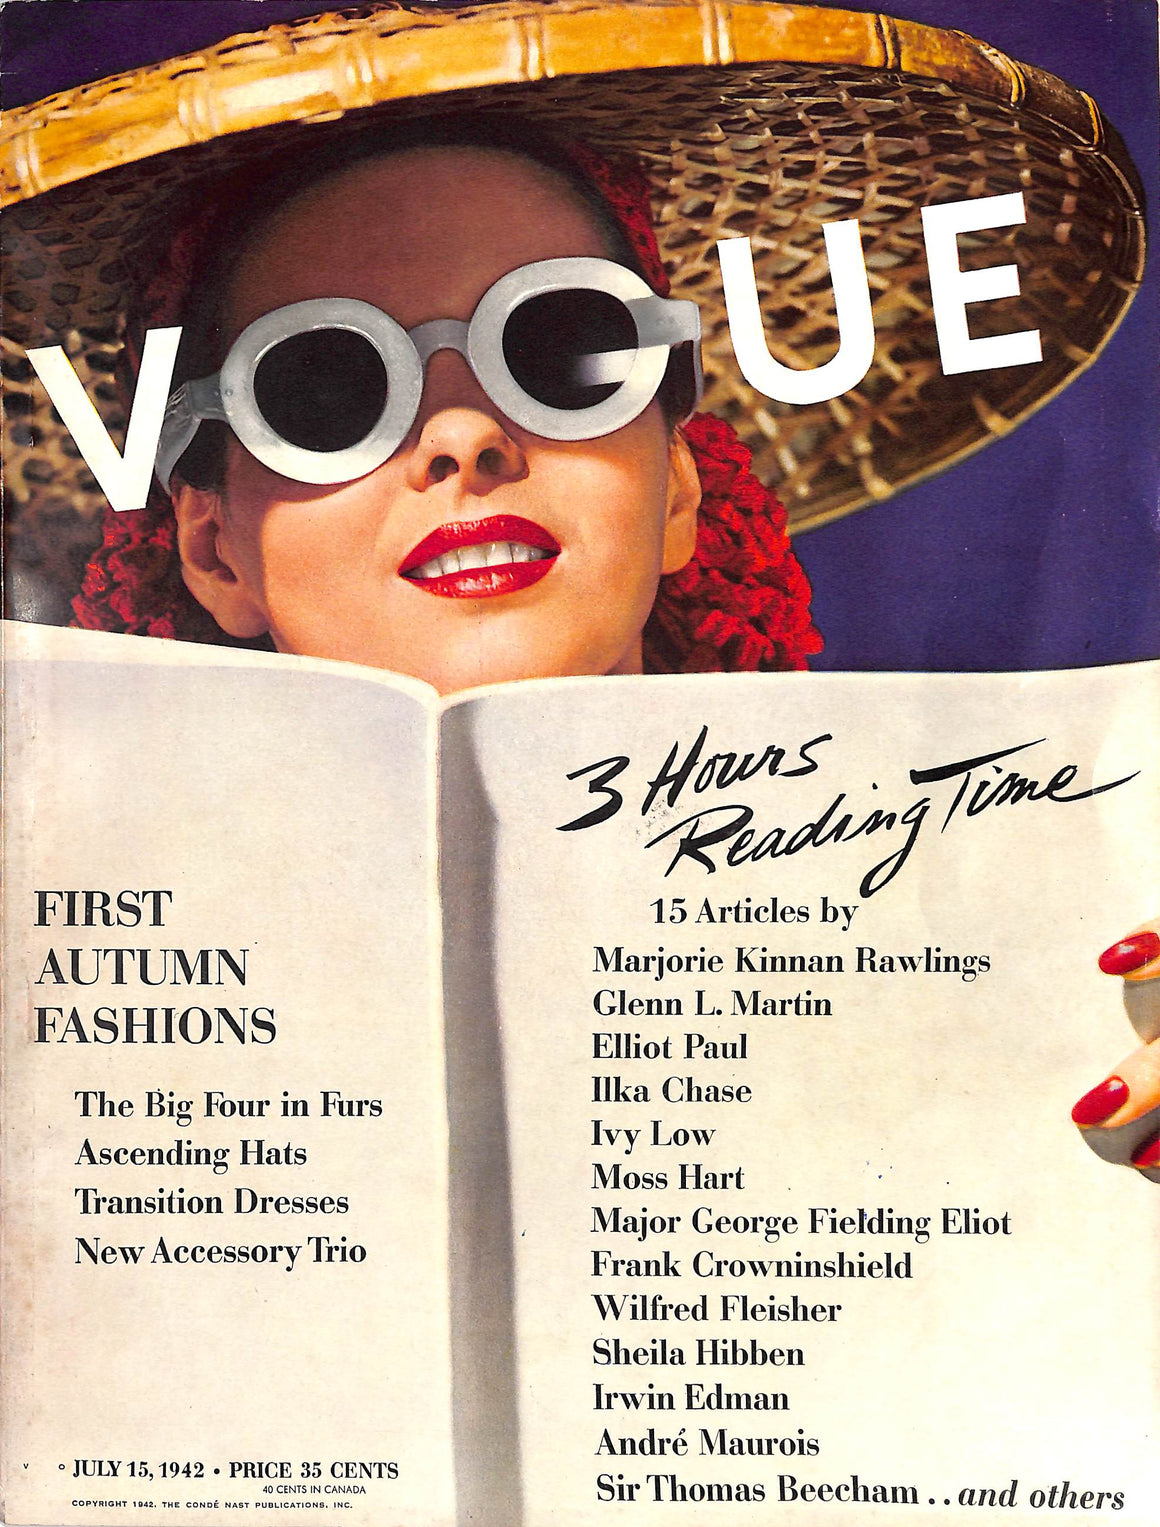 Vogue First Autumn Fashions July 15, 1942